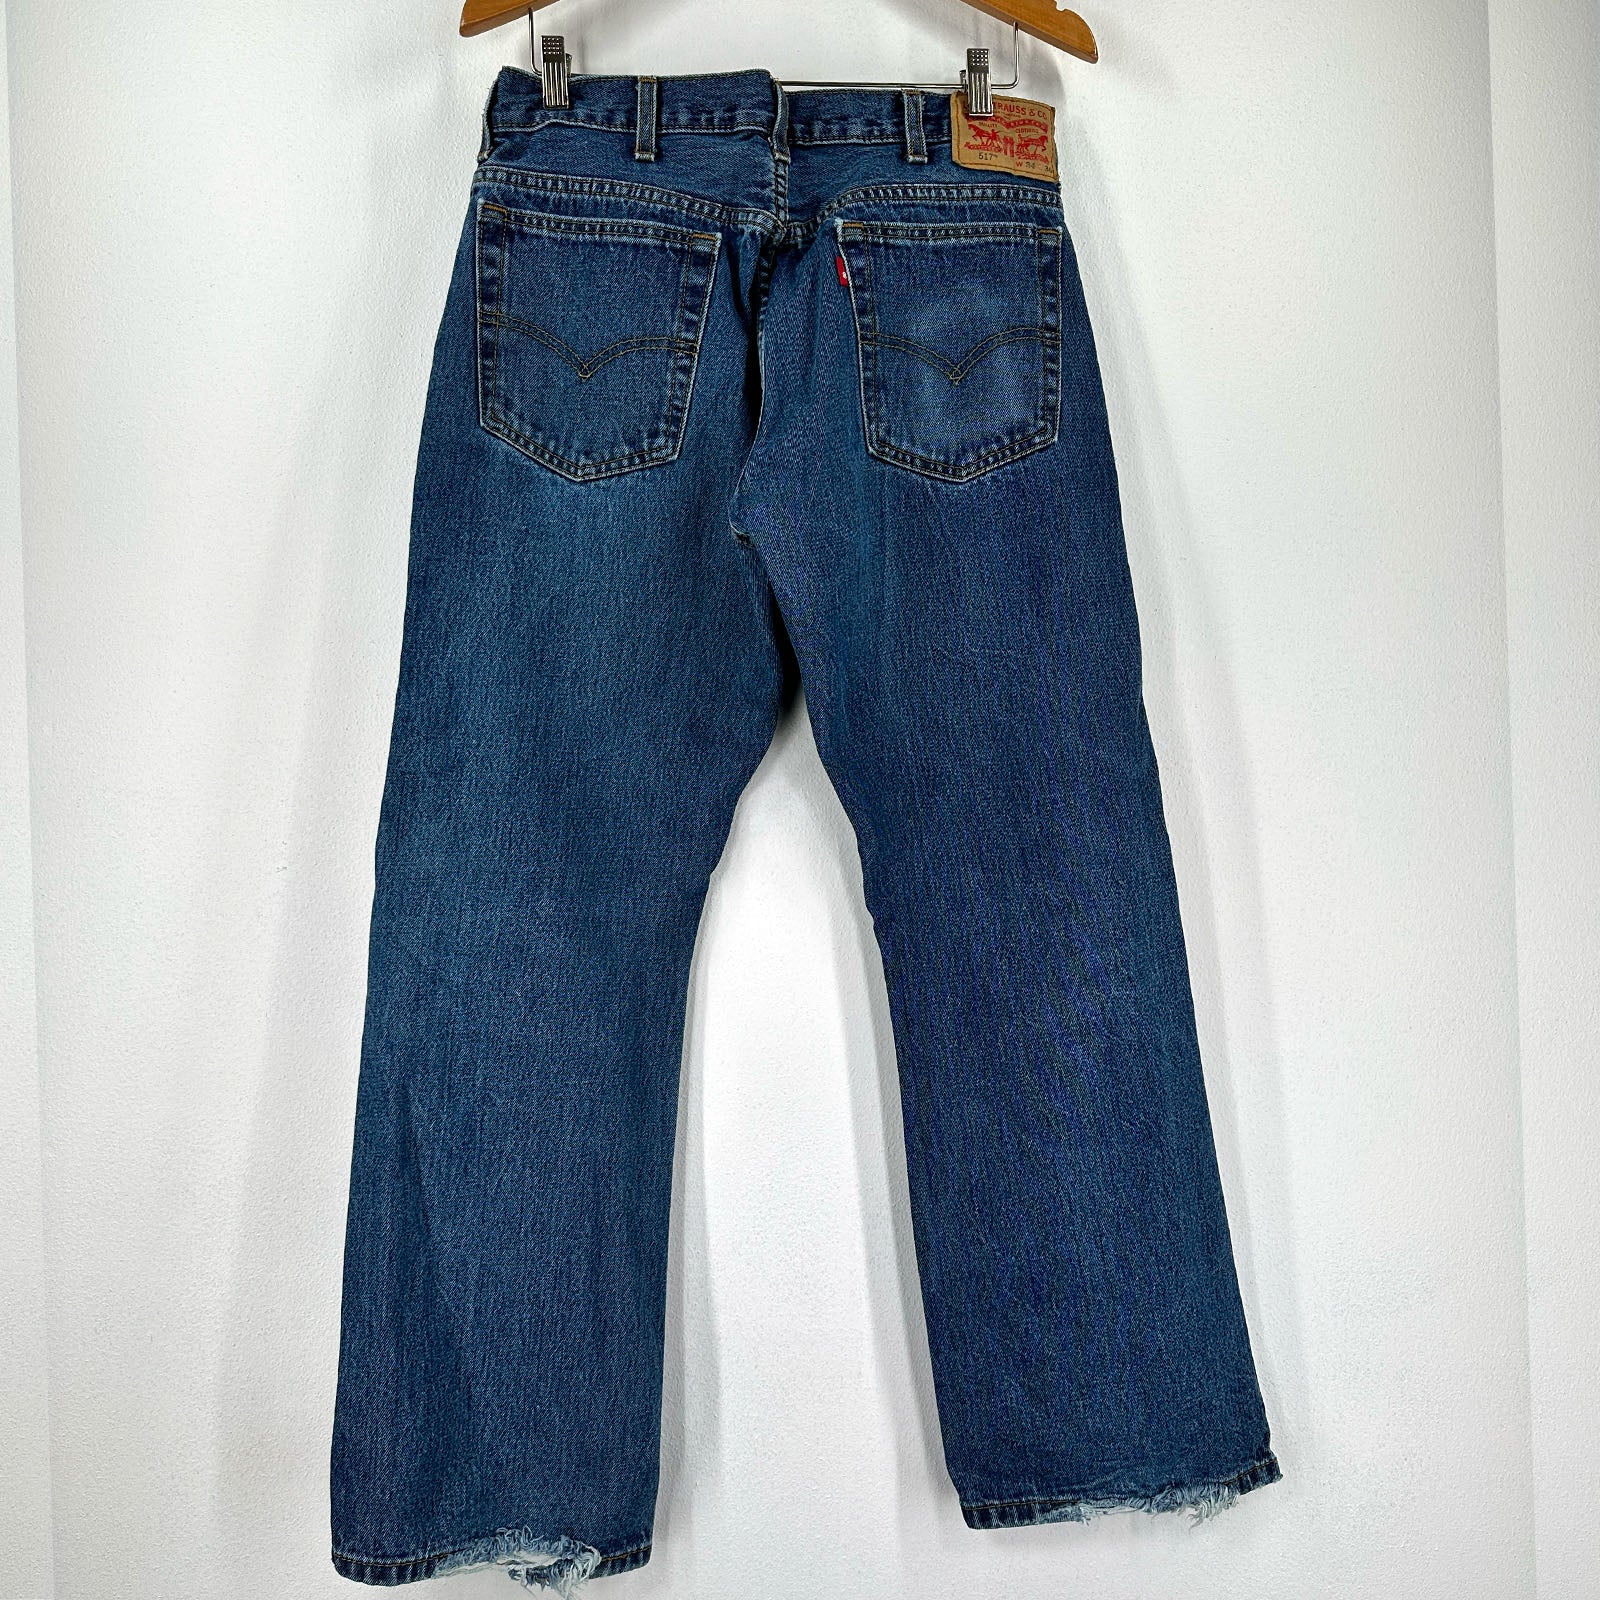 Bandana Patched Reclaimed Levi's 517 Boot Cut - 33x29 Great Lakes Reclaimed Denim